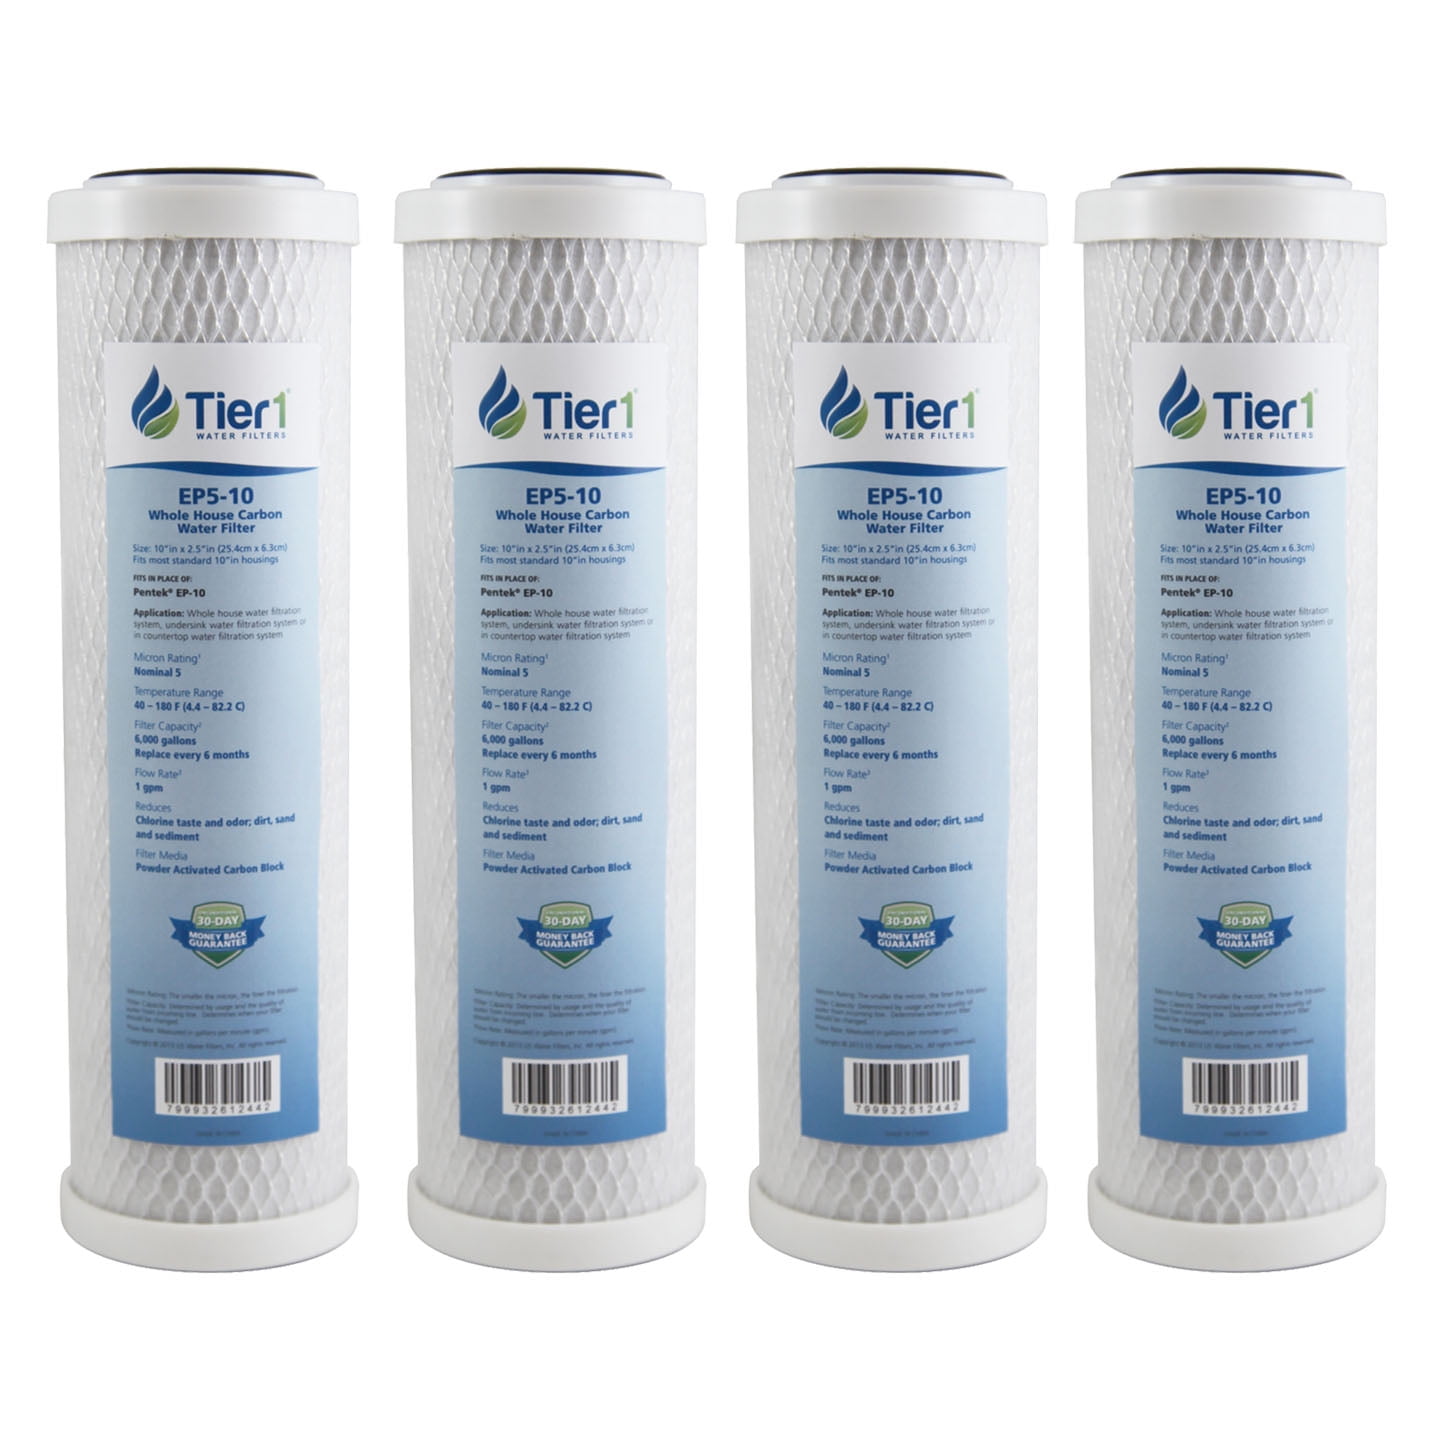 Fits Pentek EP-10 5 Micron 10 x 2.5 Comparable Carbon Water Filter 6 Pack 